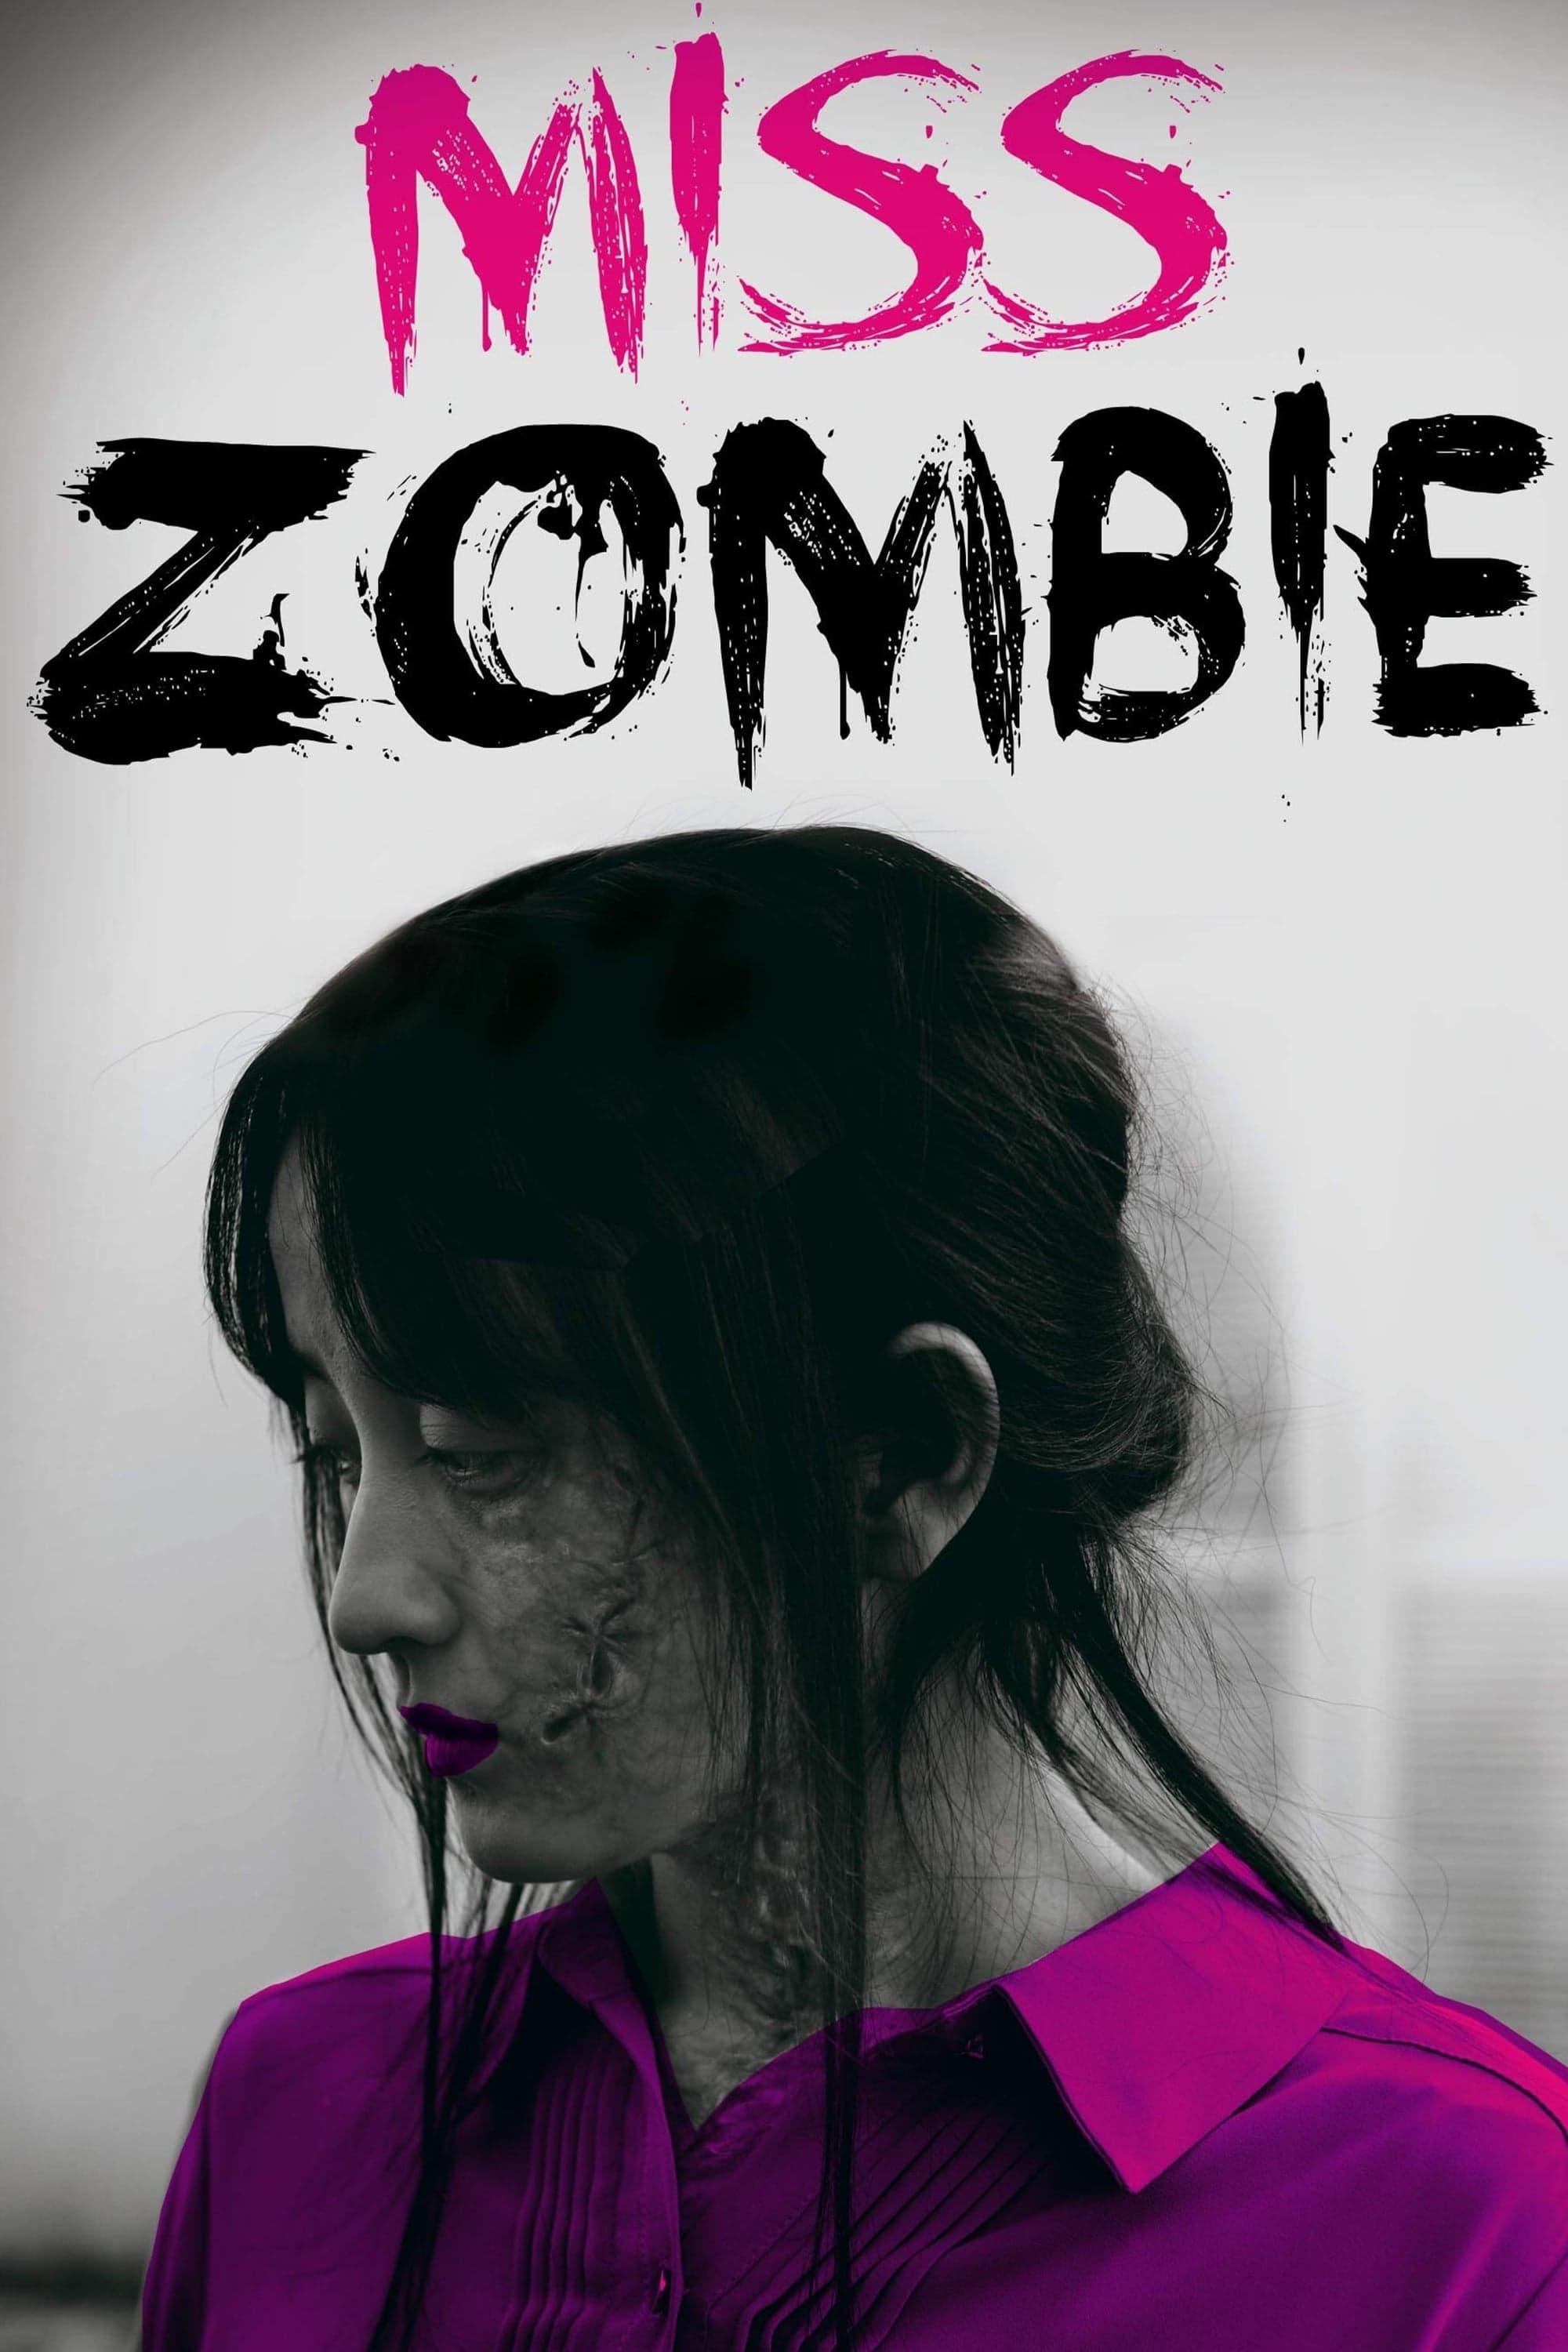 Miss Zombie poster